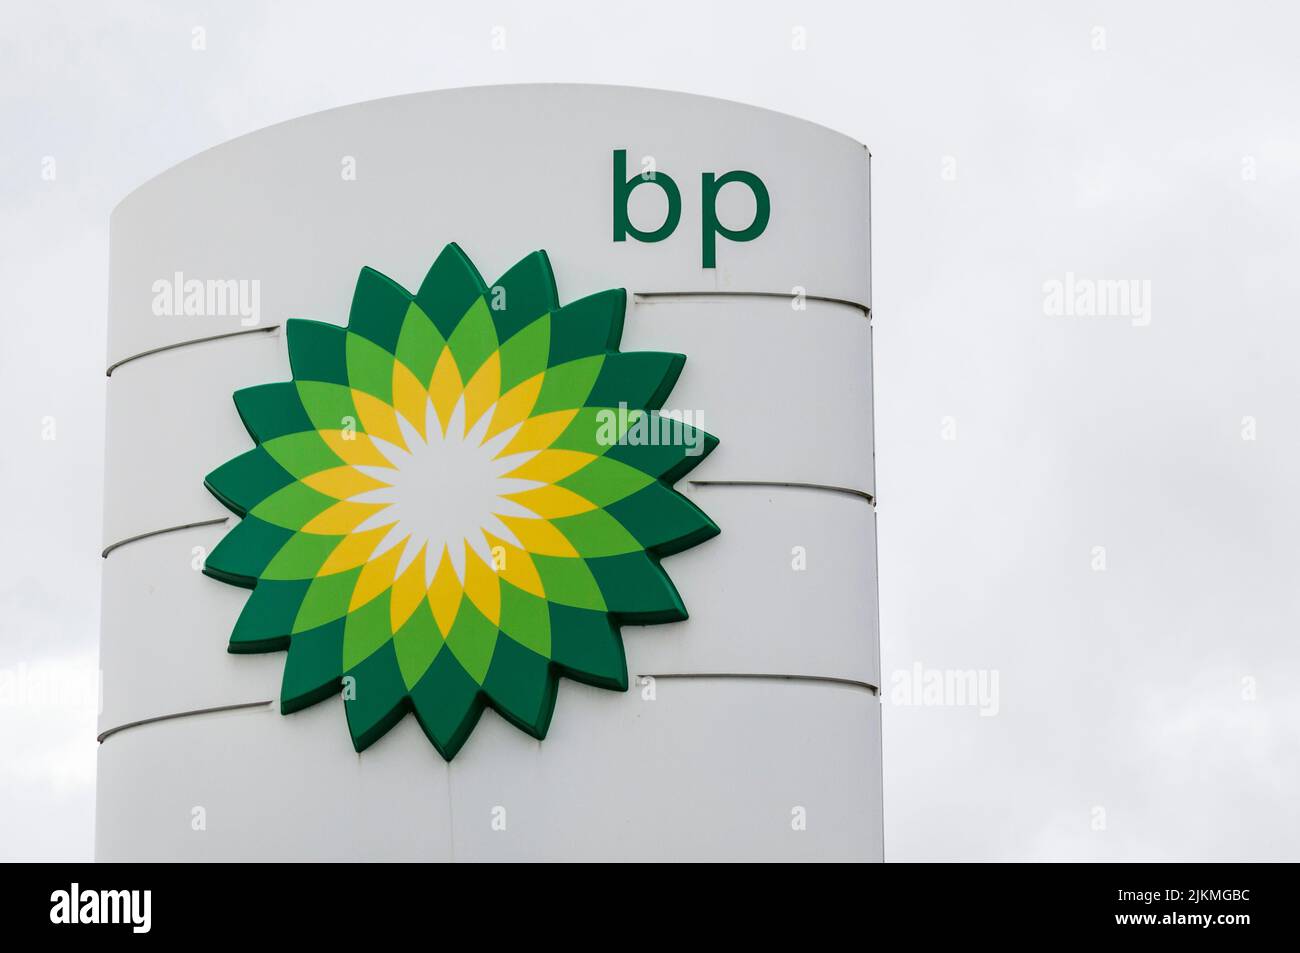 Stockton on Tees, UK. 2nd August 2022. BP has reported its biggest quarterly profit for 14 years after oil and gas prices soared. Fuel outlet in town. David Dixon / Alamy Stock Photo